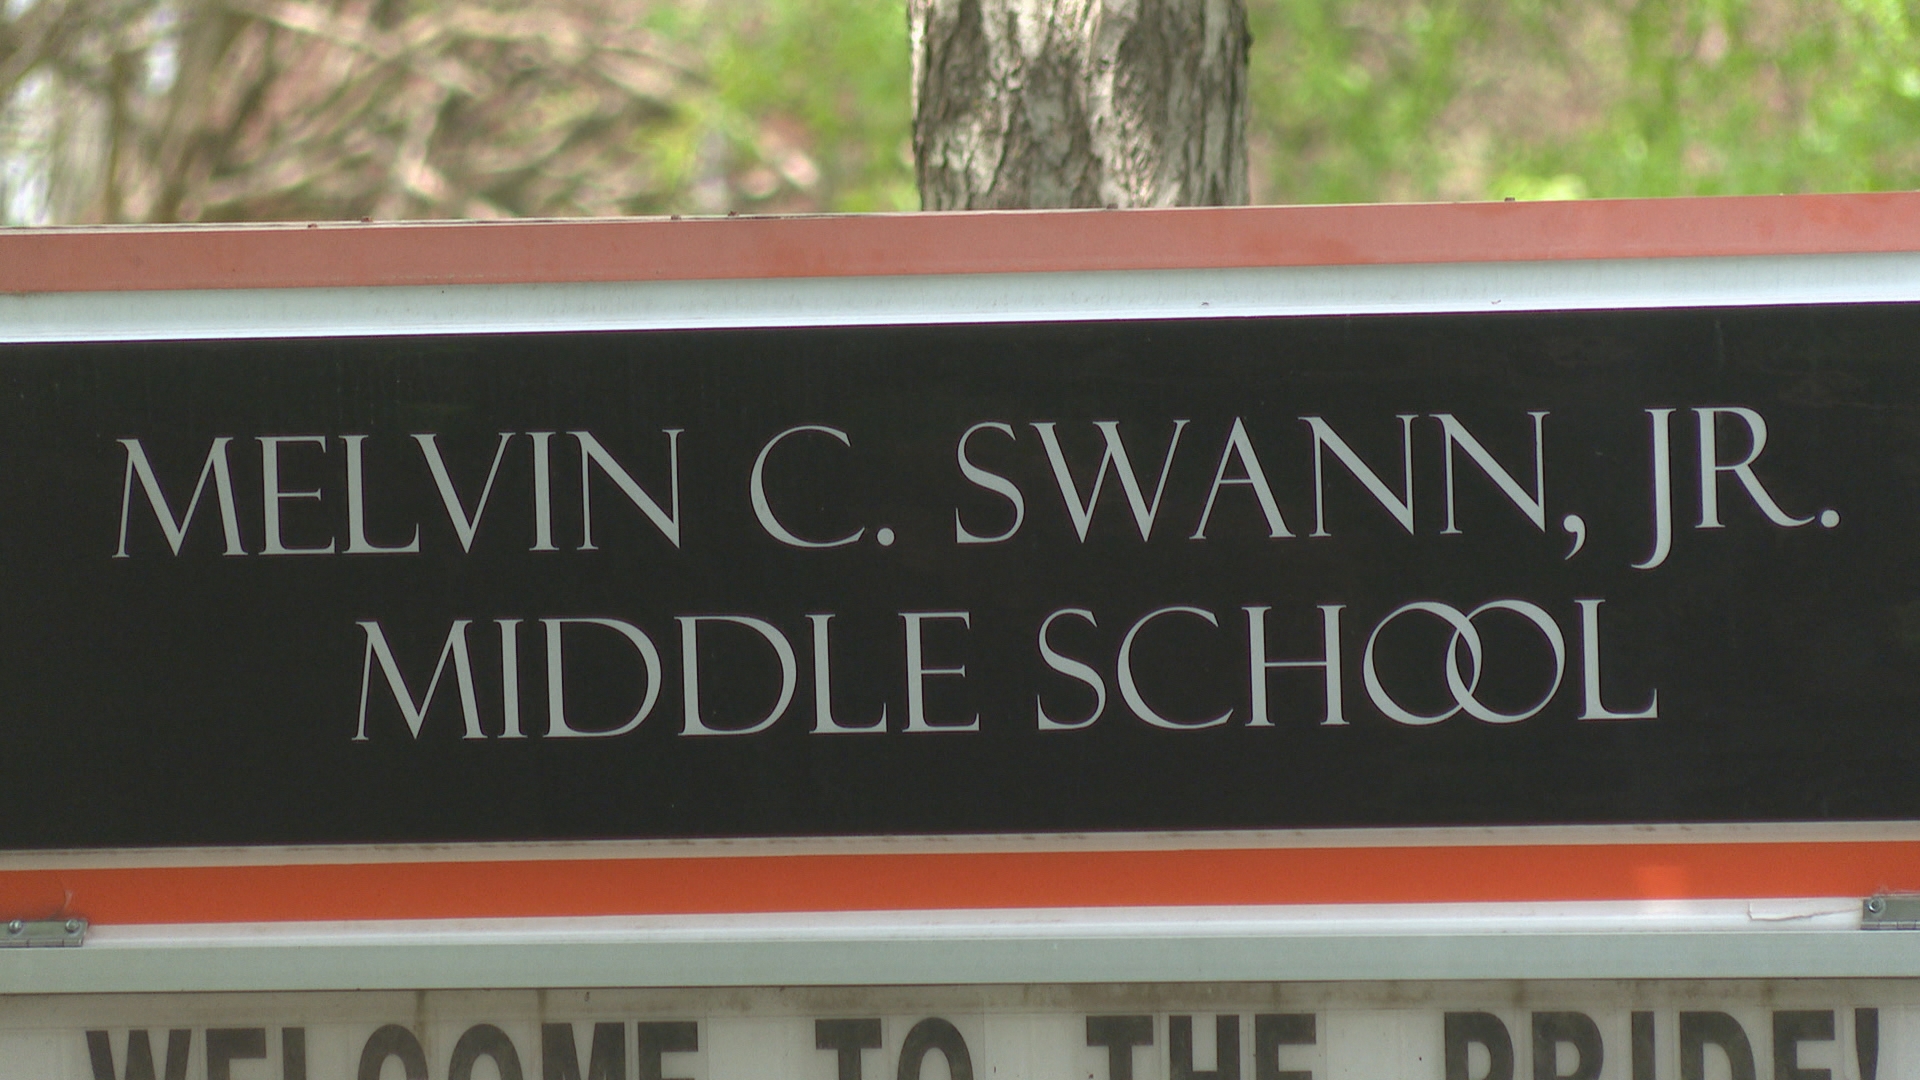 Swann Middle School will undergo renovations and program changes.